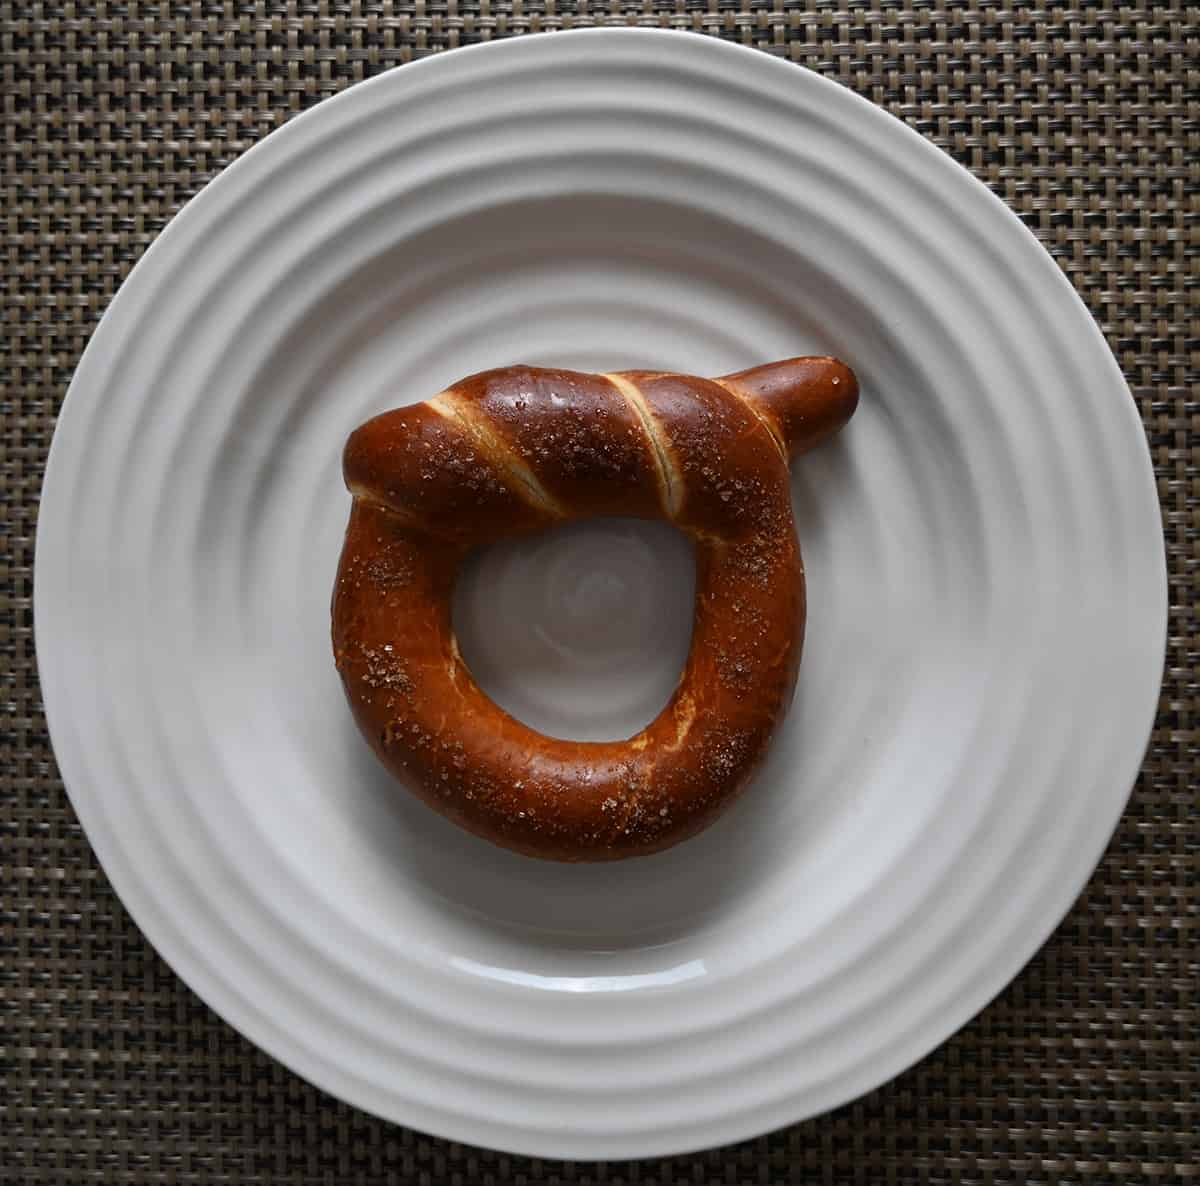 Top down image of one baked wheelhouse pretzel served on a white plate.